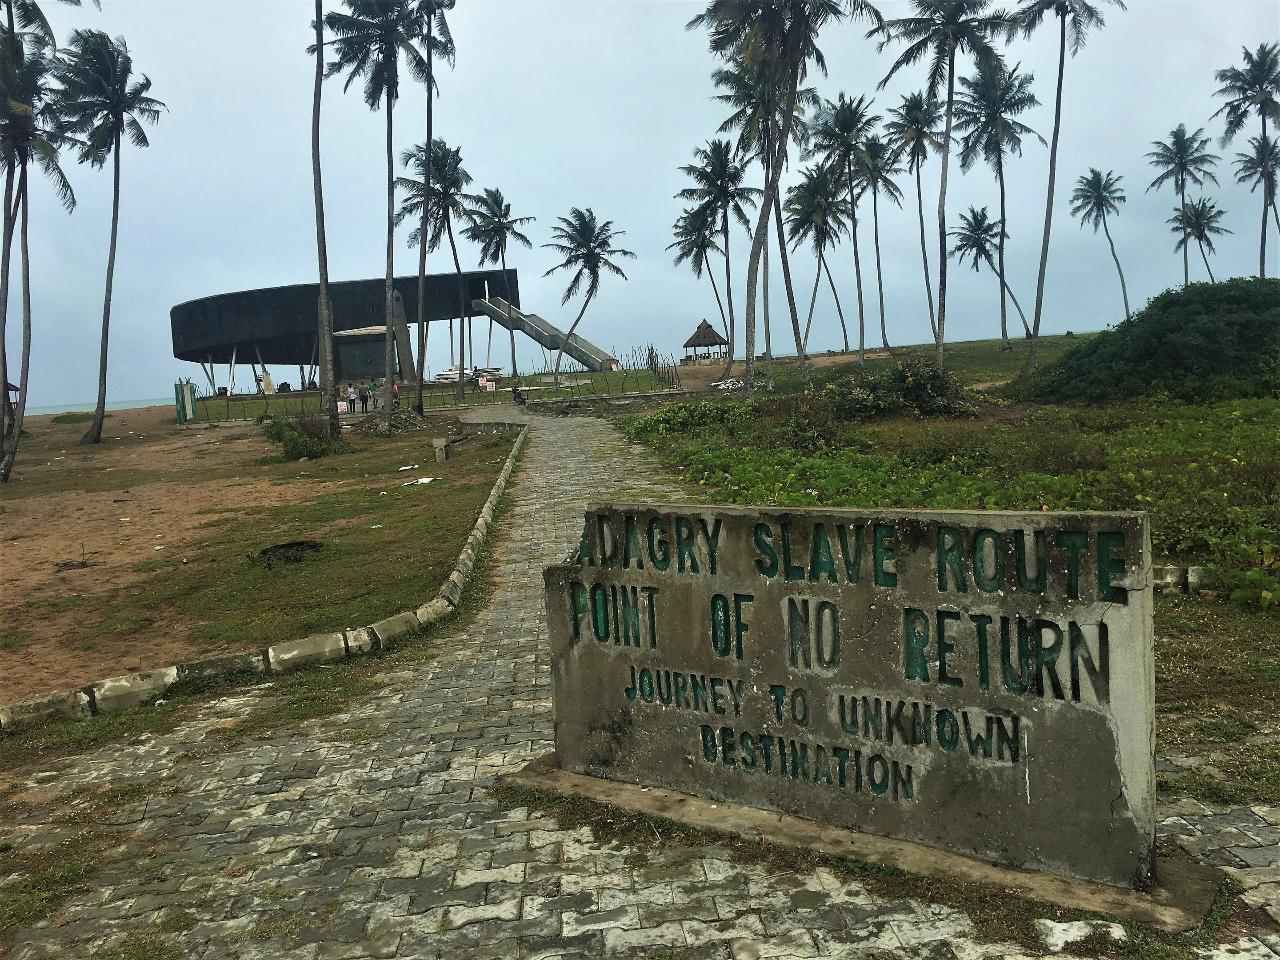 Badagry Slave Trade History Tour from Lagos